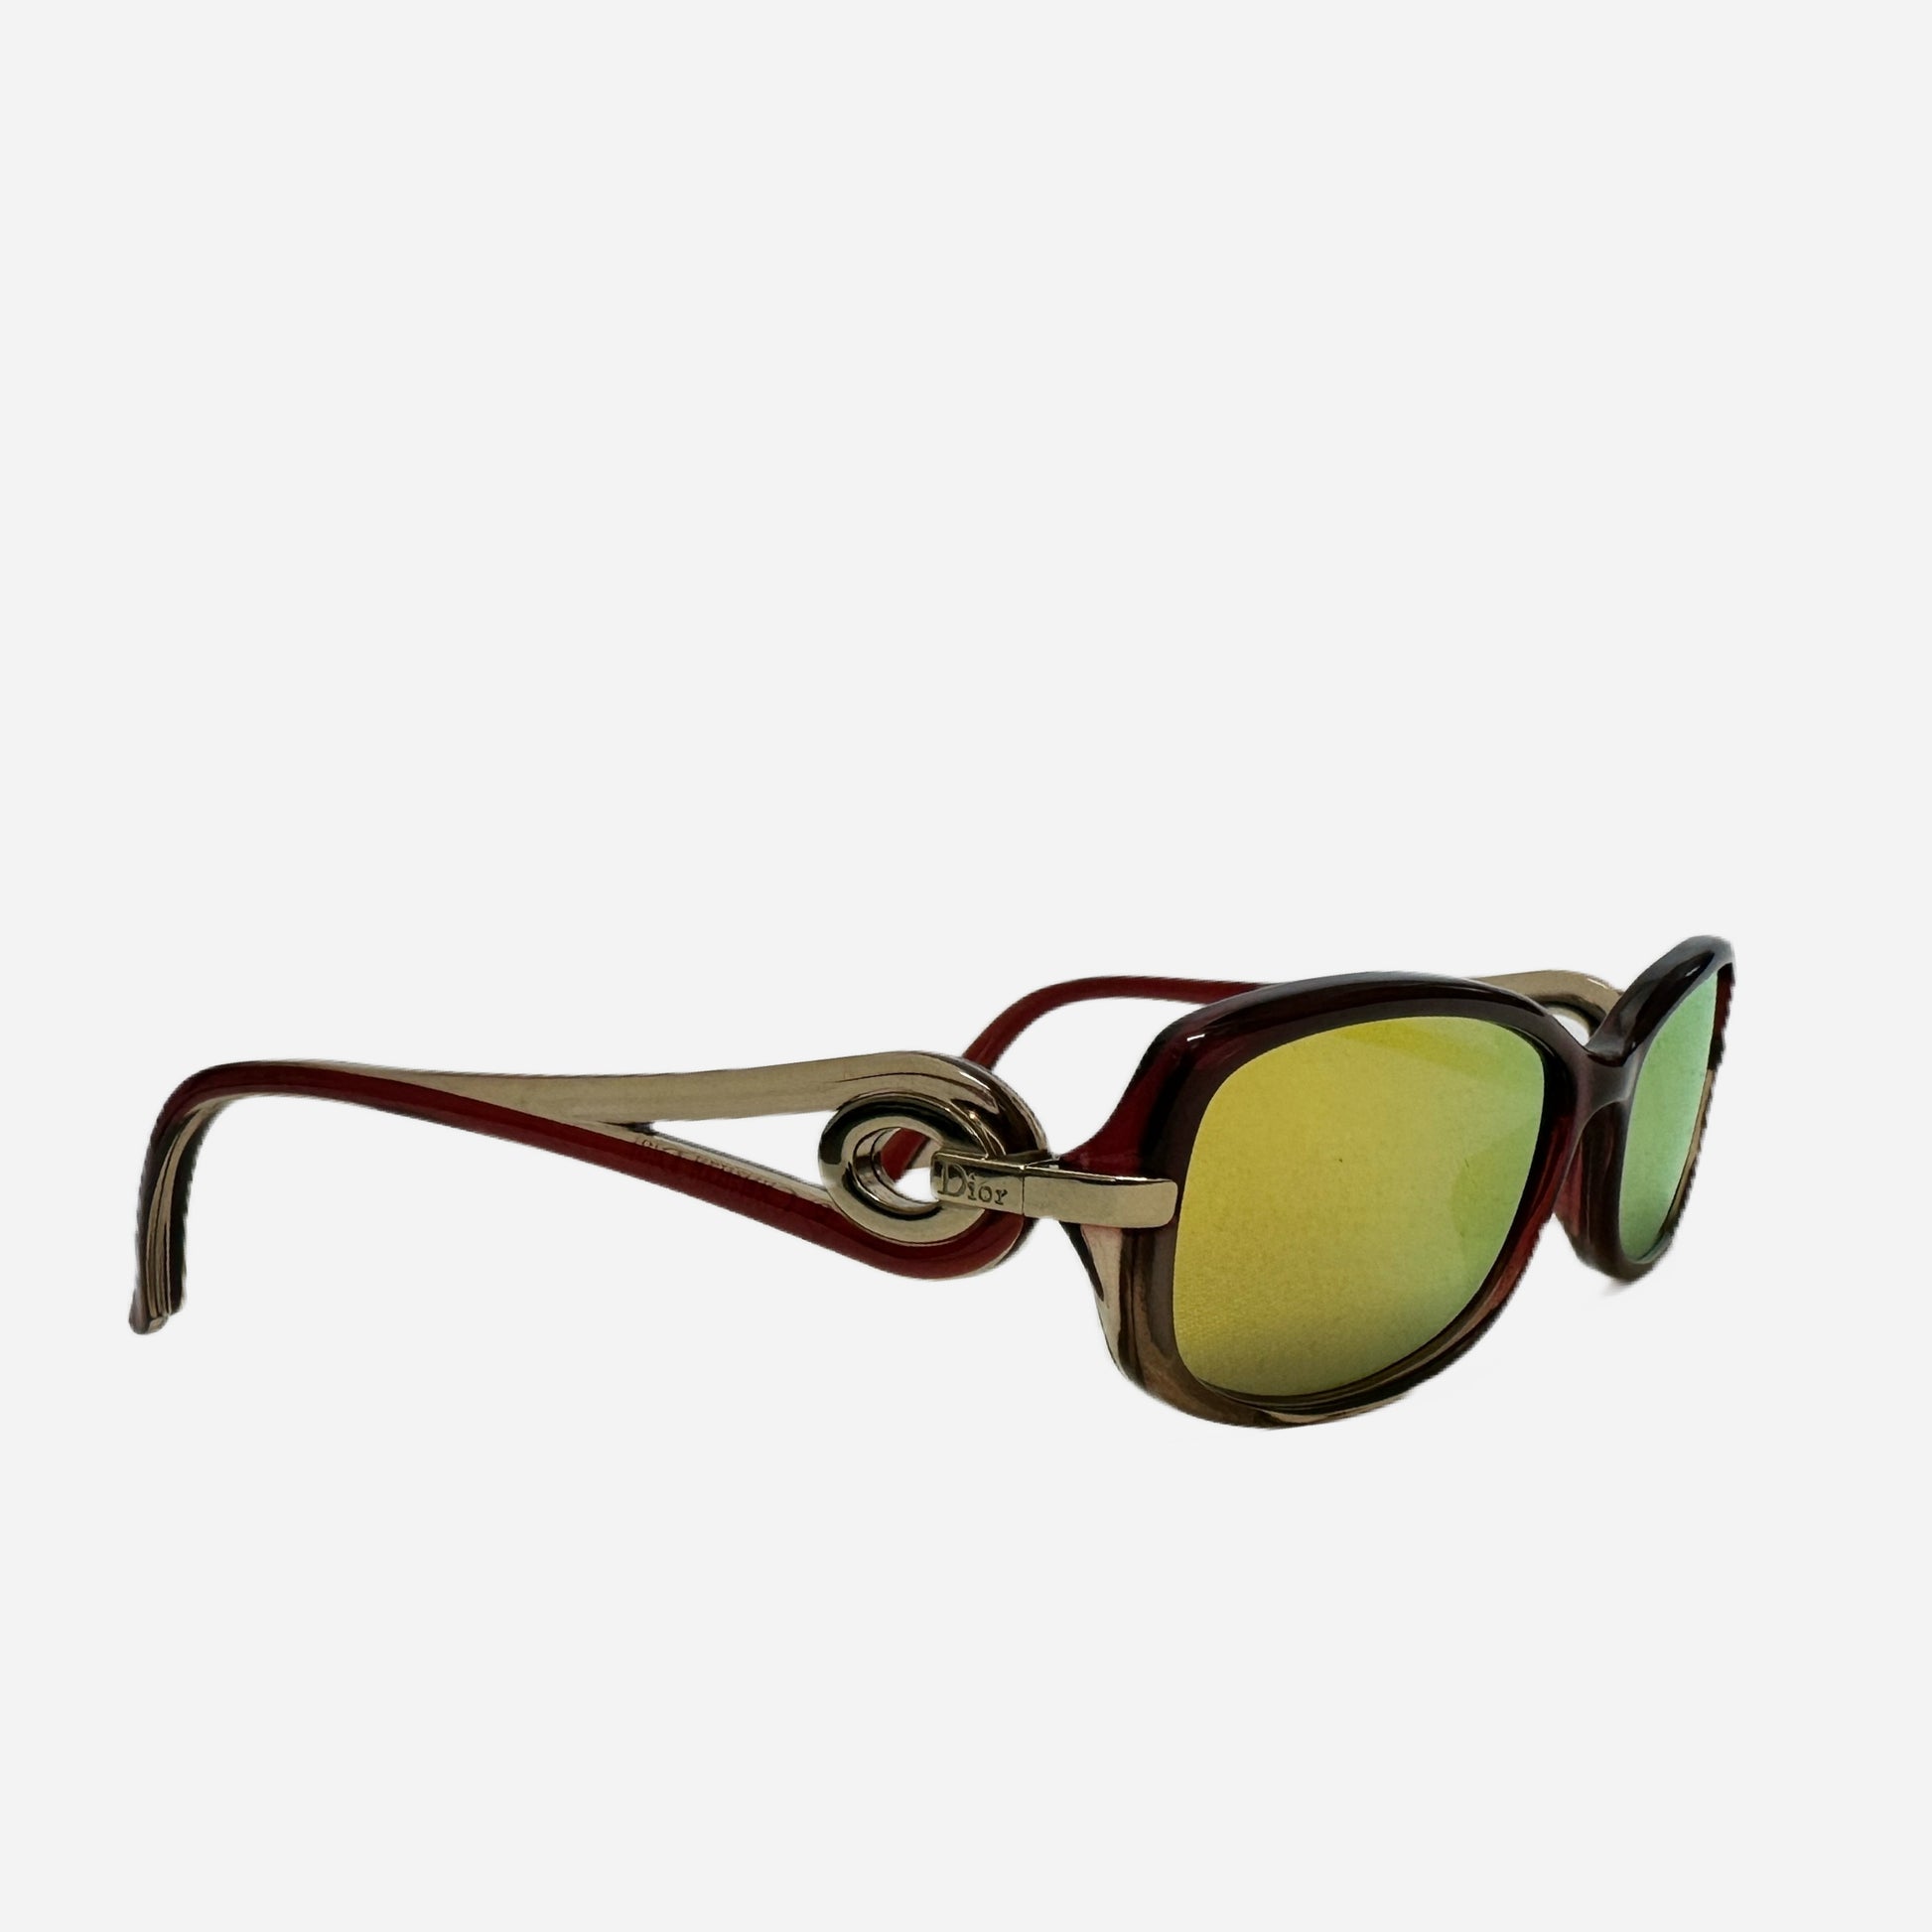 Vintage-Christian-Dior-Sonnenbrille-Sonnenbrille-3216-Optyl-The-Seekers-front-left